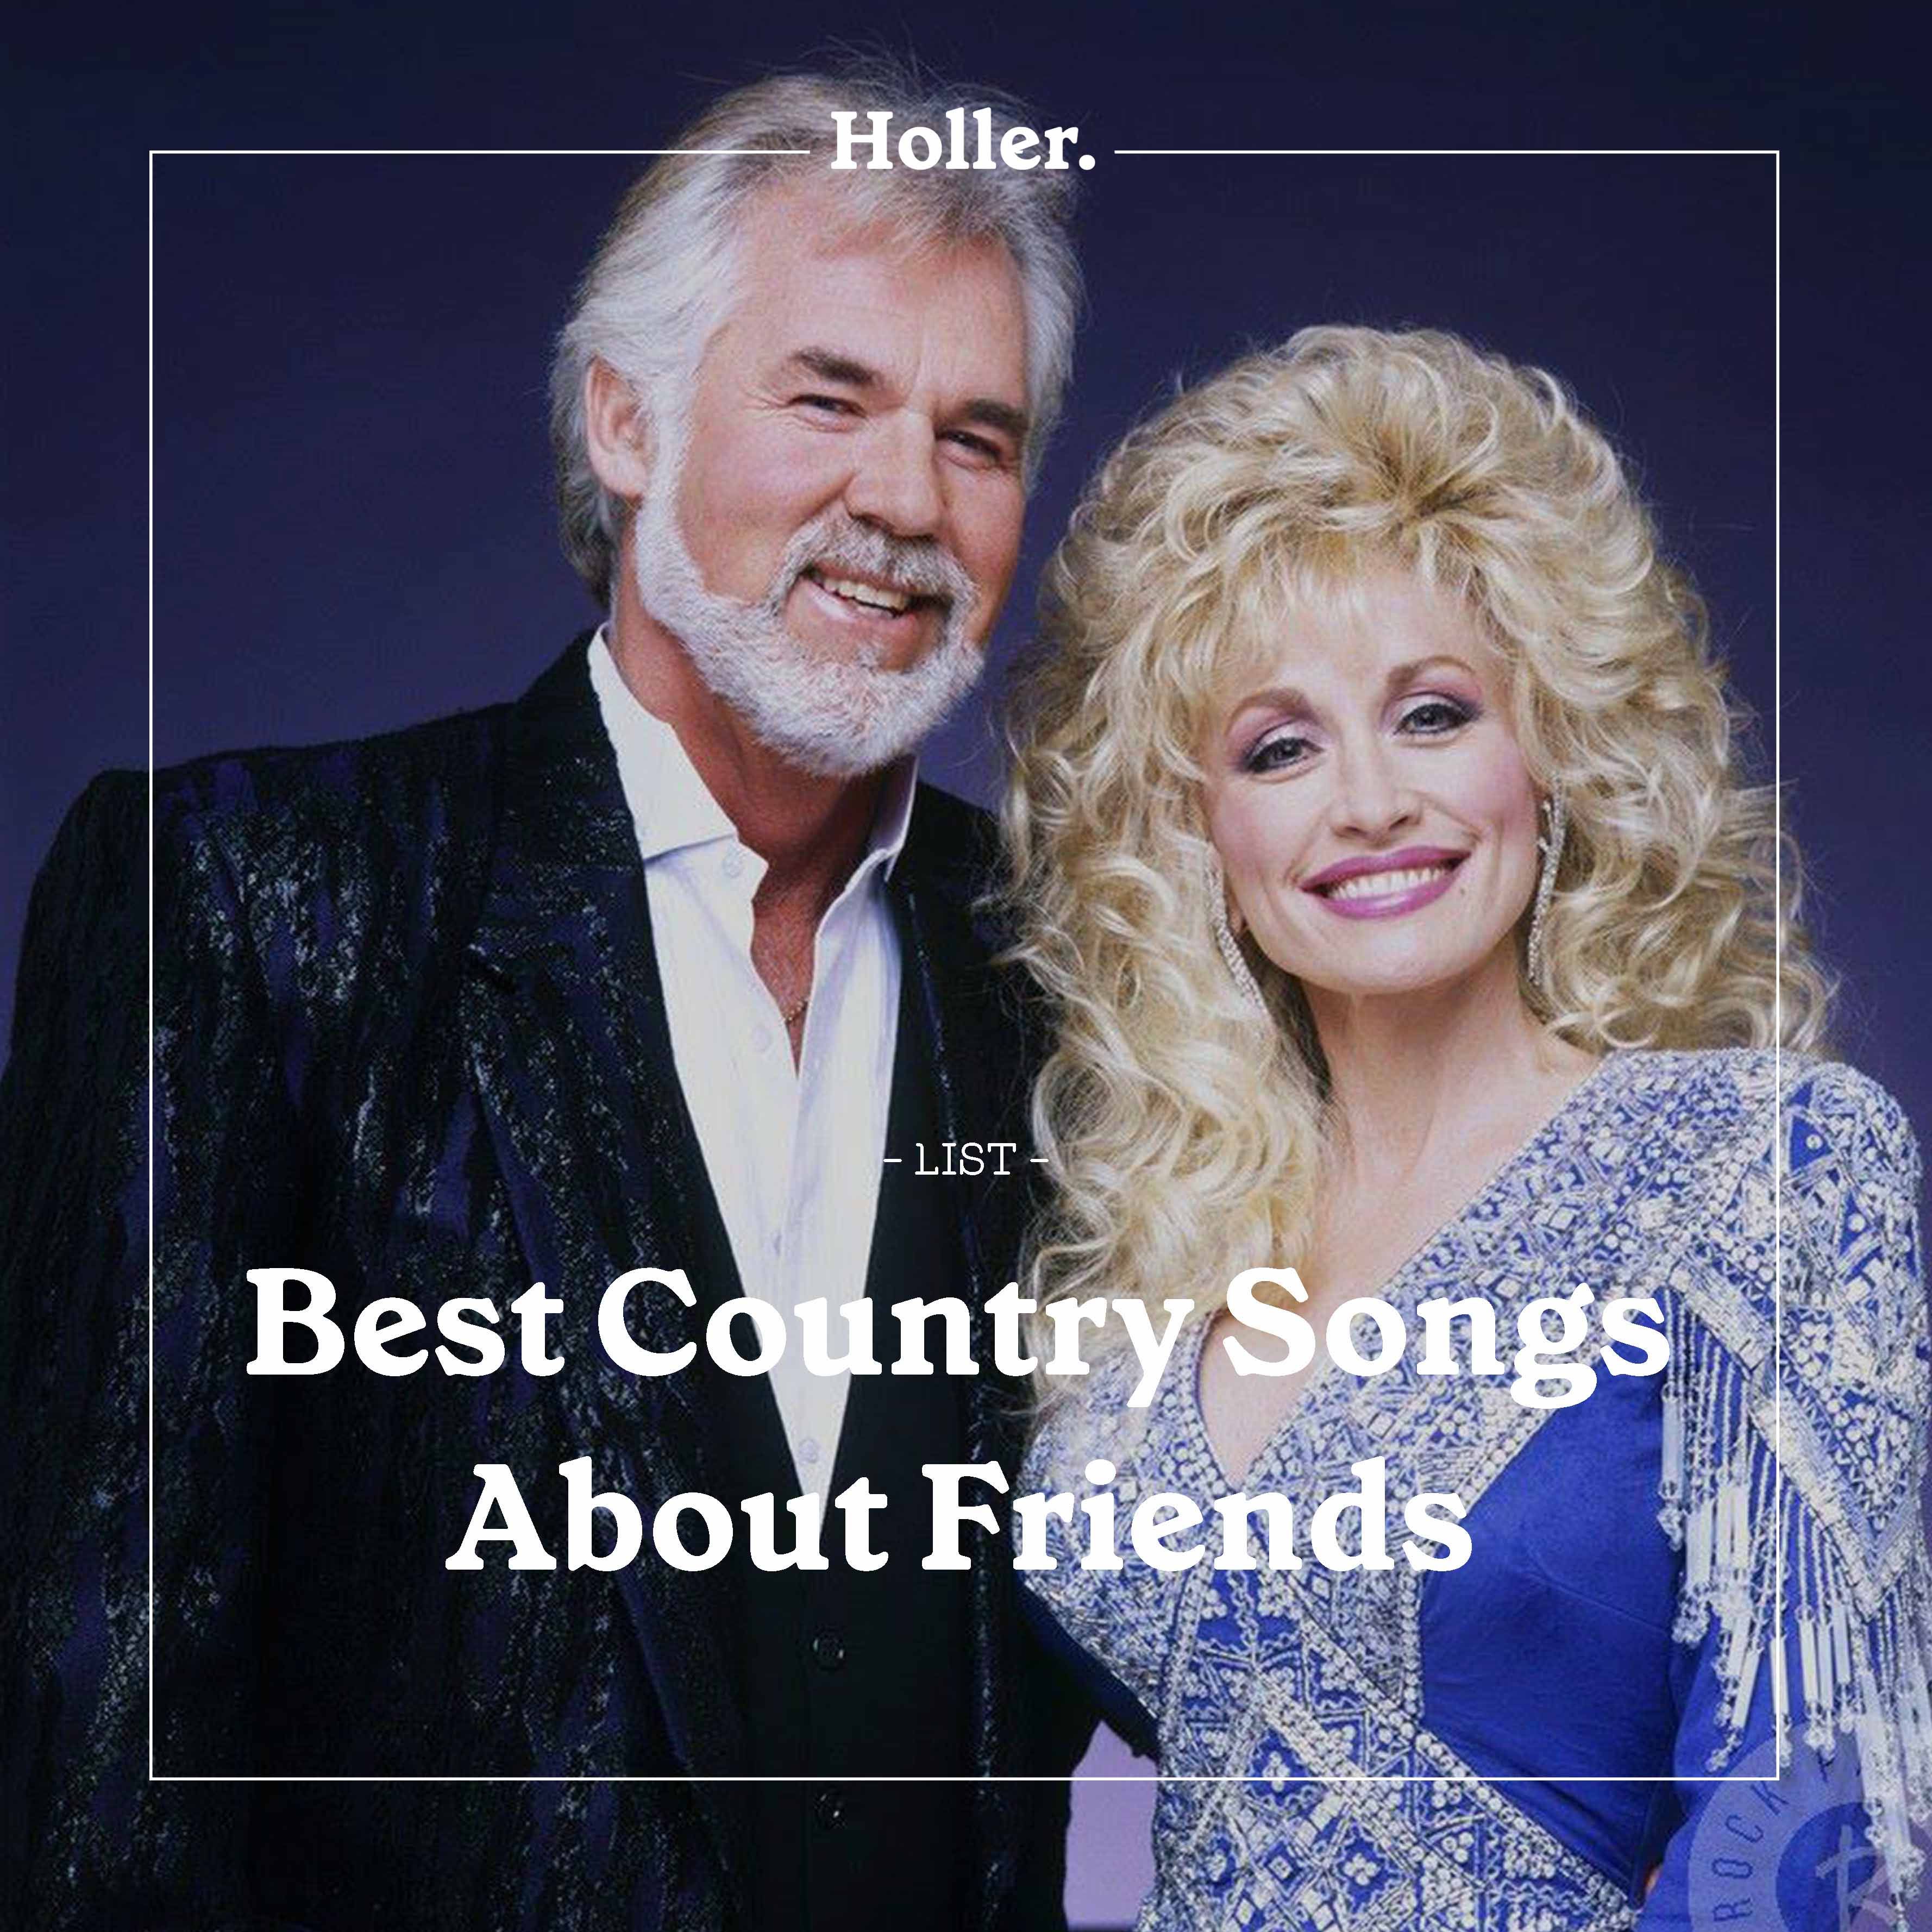 The Best Country Songs About Friends playlist Holler